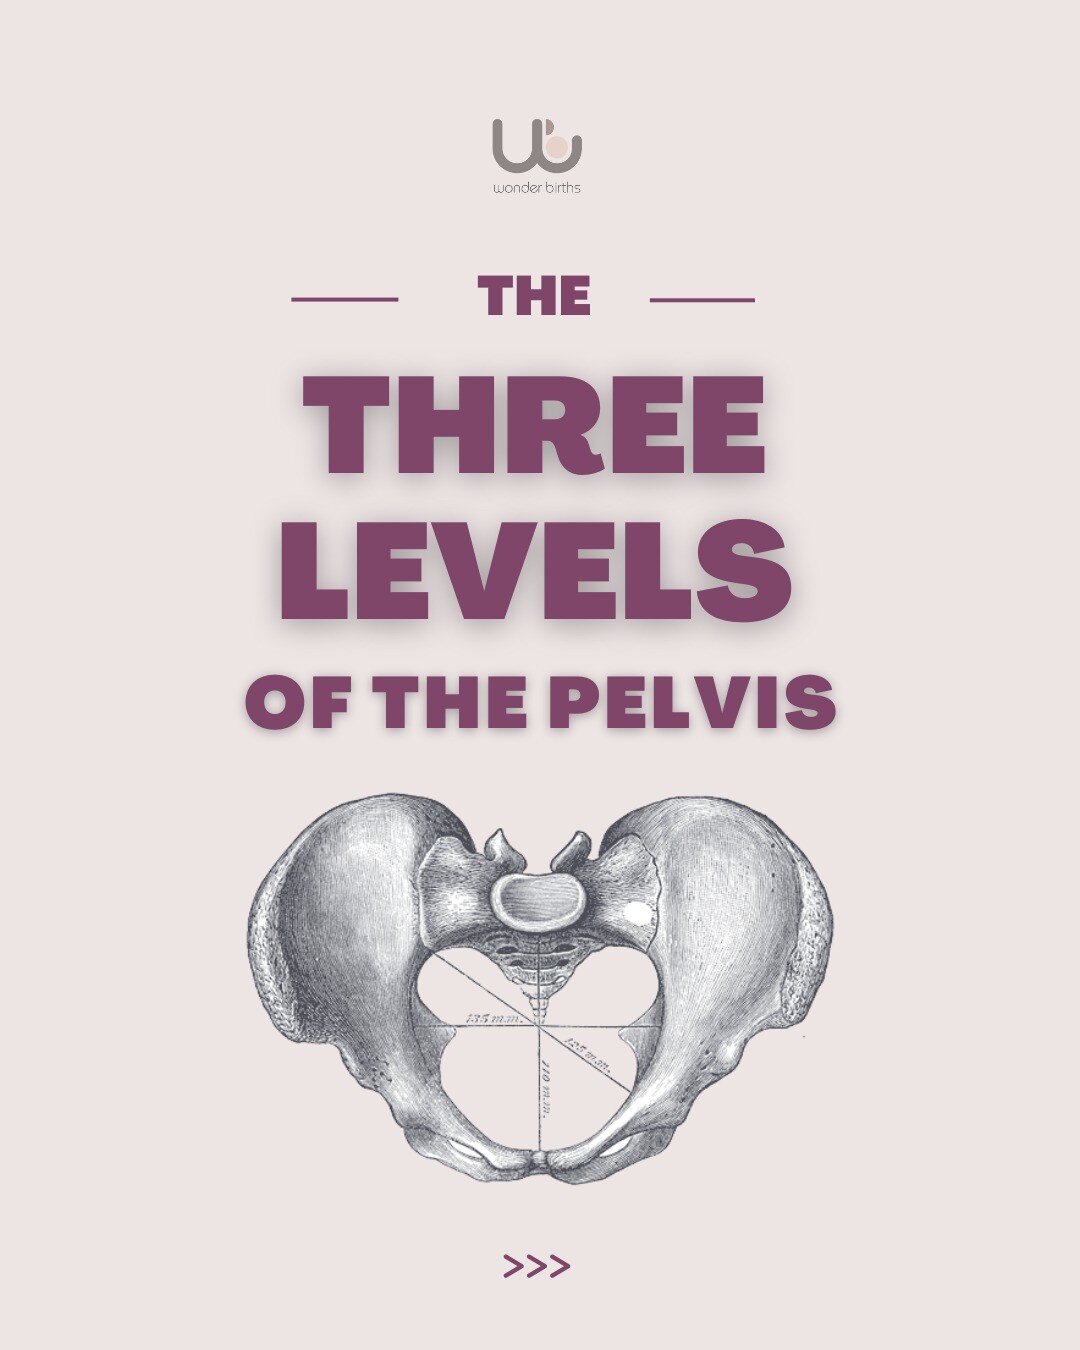 Did you know that the pelvis is actually made up of three distinct layers?⁣
⁣
These layers are the INLET, MID-PELVIS and OUTLET. Each layer has its own unique characteristics that make it possible to birth a baby. ⁣Scroll through to find out more!
⁣
